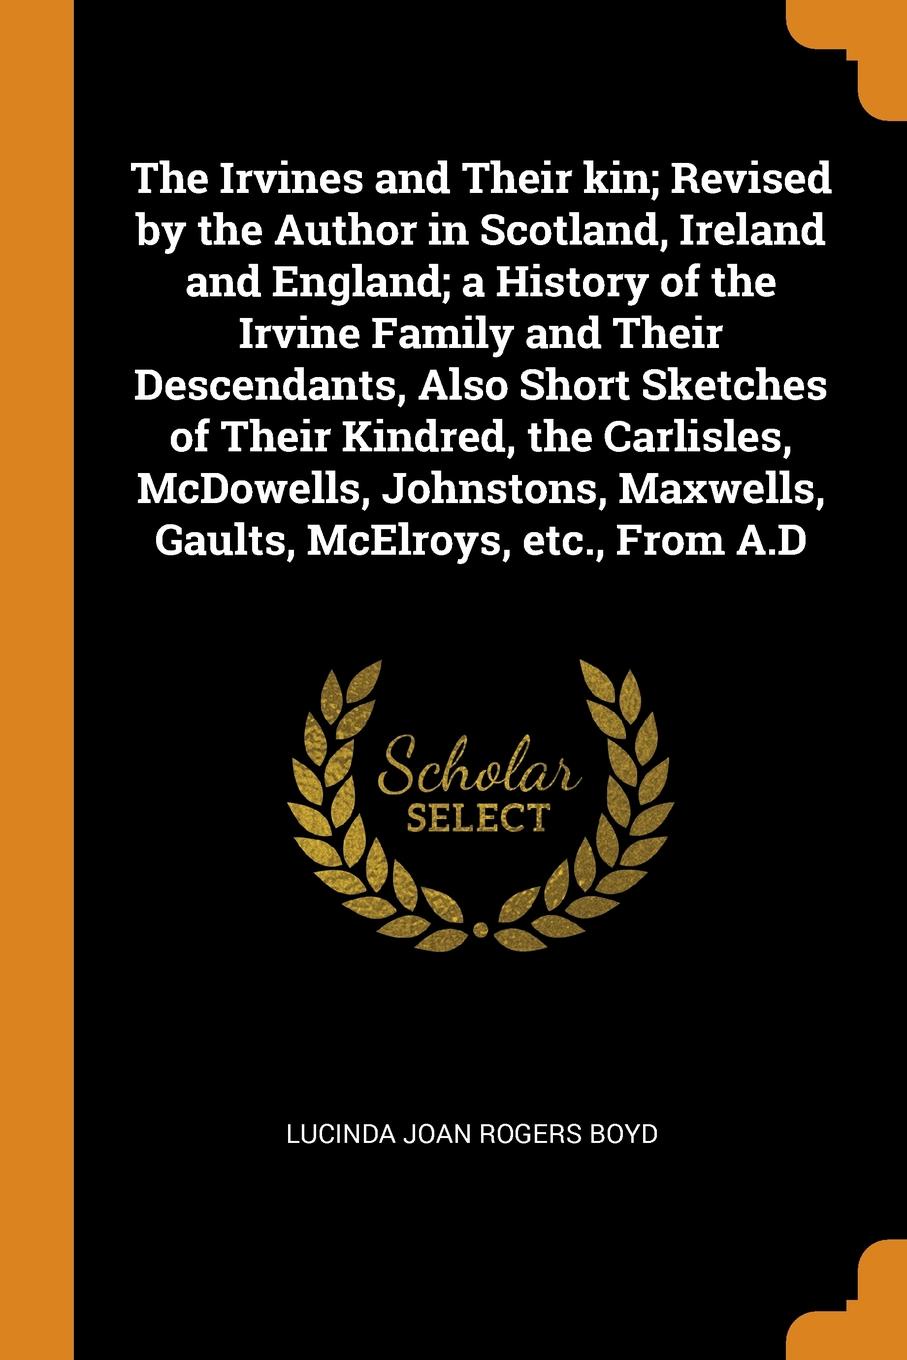 The Irvines and Their kin; Revised by the Author in Scotland, Ireland and England; a History of the Irvine Family and Their Descendants, Also Short Sketches of Their Kindred, the Carlisles, McDowells, Johnstons, Maxwells, Gaults, McElroys, etc., F...